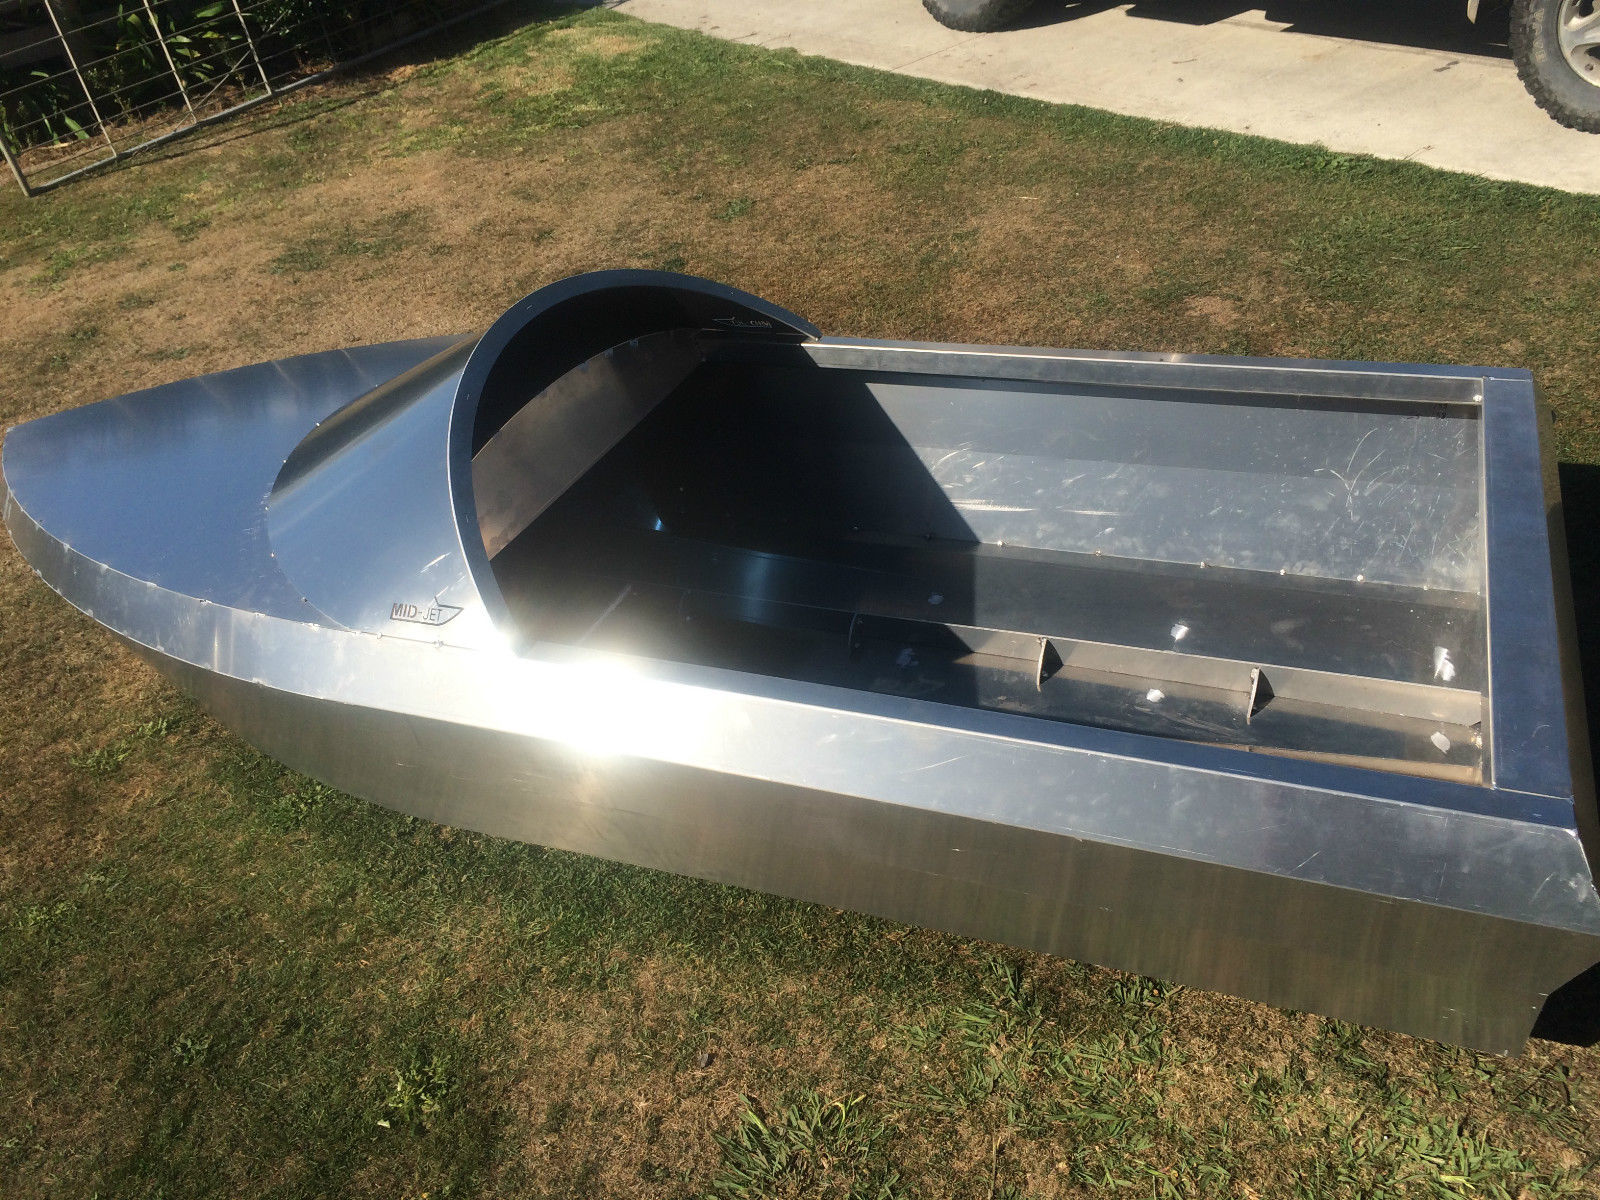 Aluminium Jet Boat 2016 for sale for $2,500 - Boats-from ...